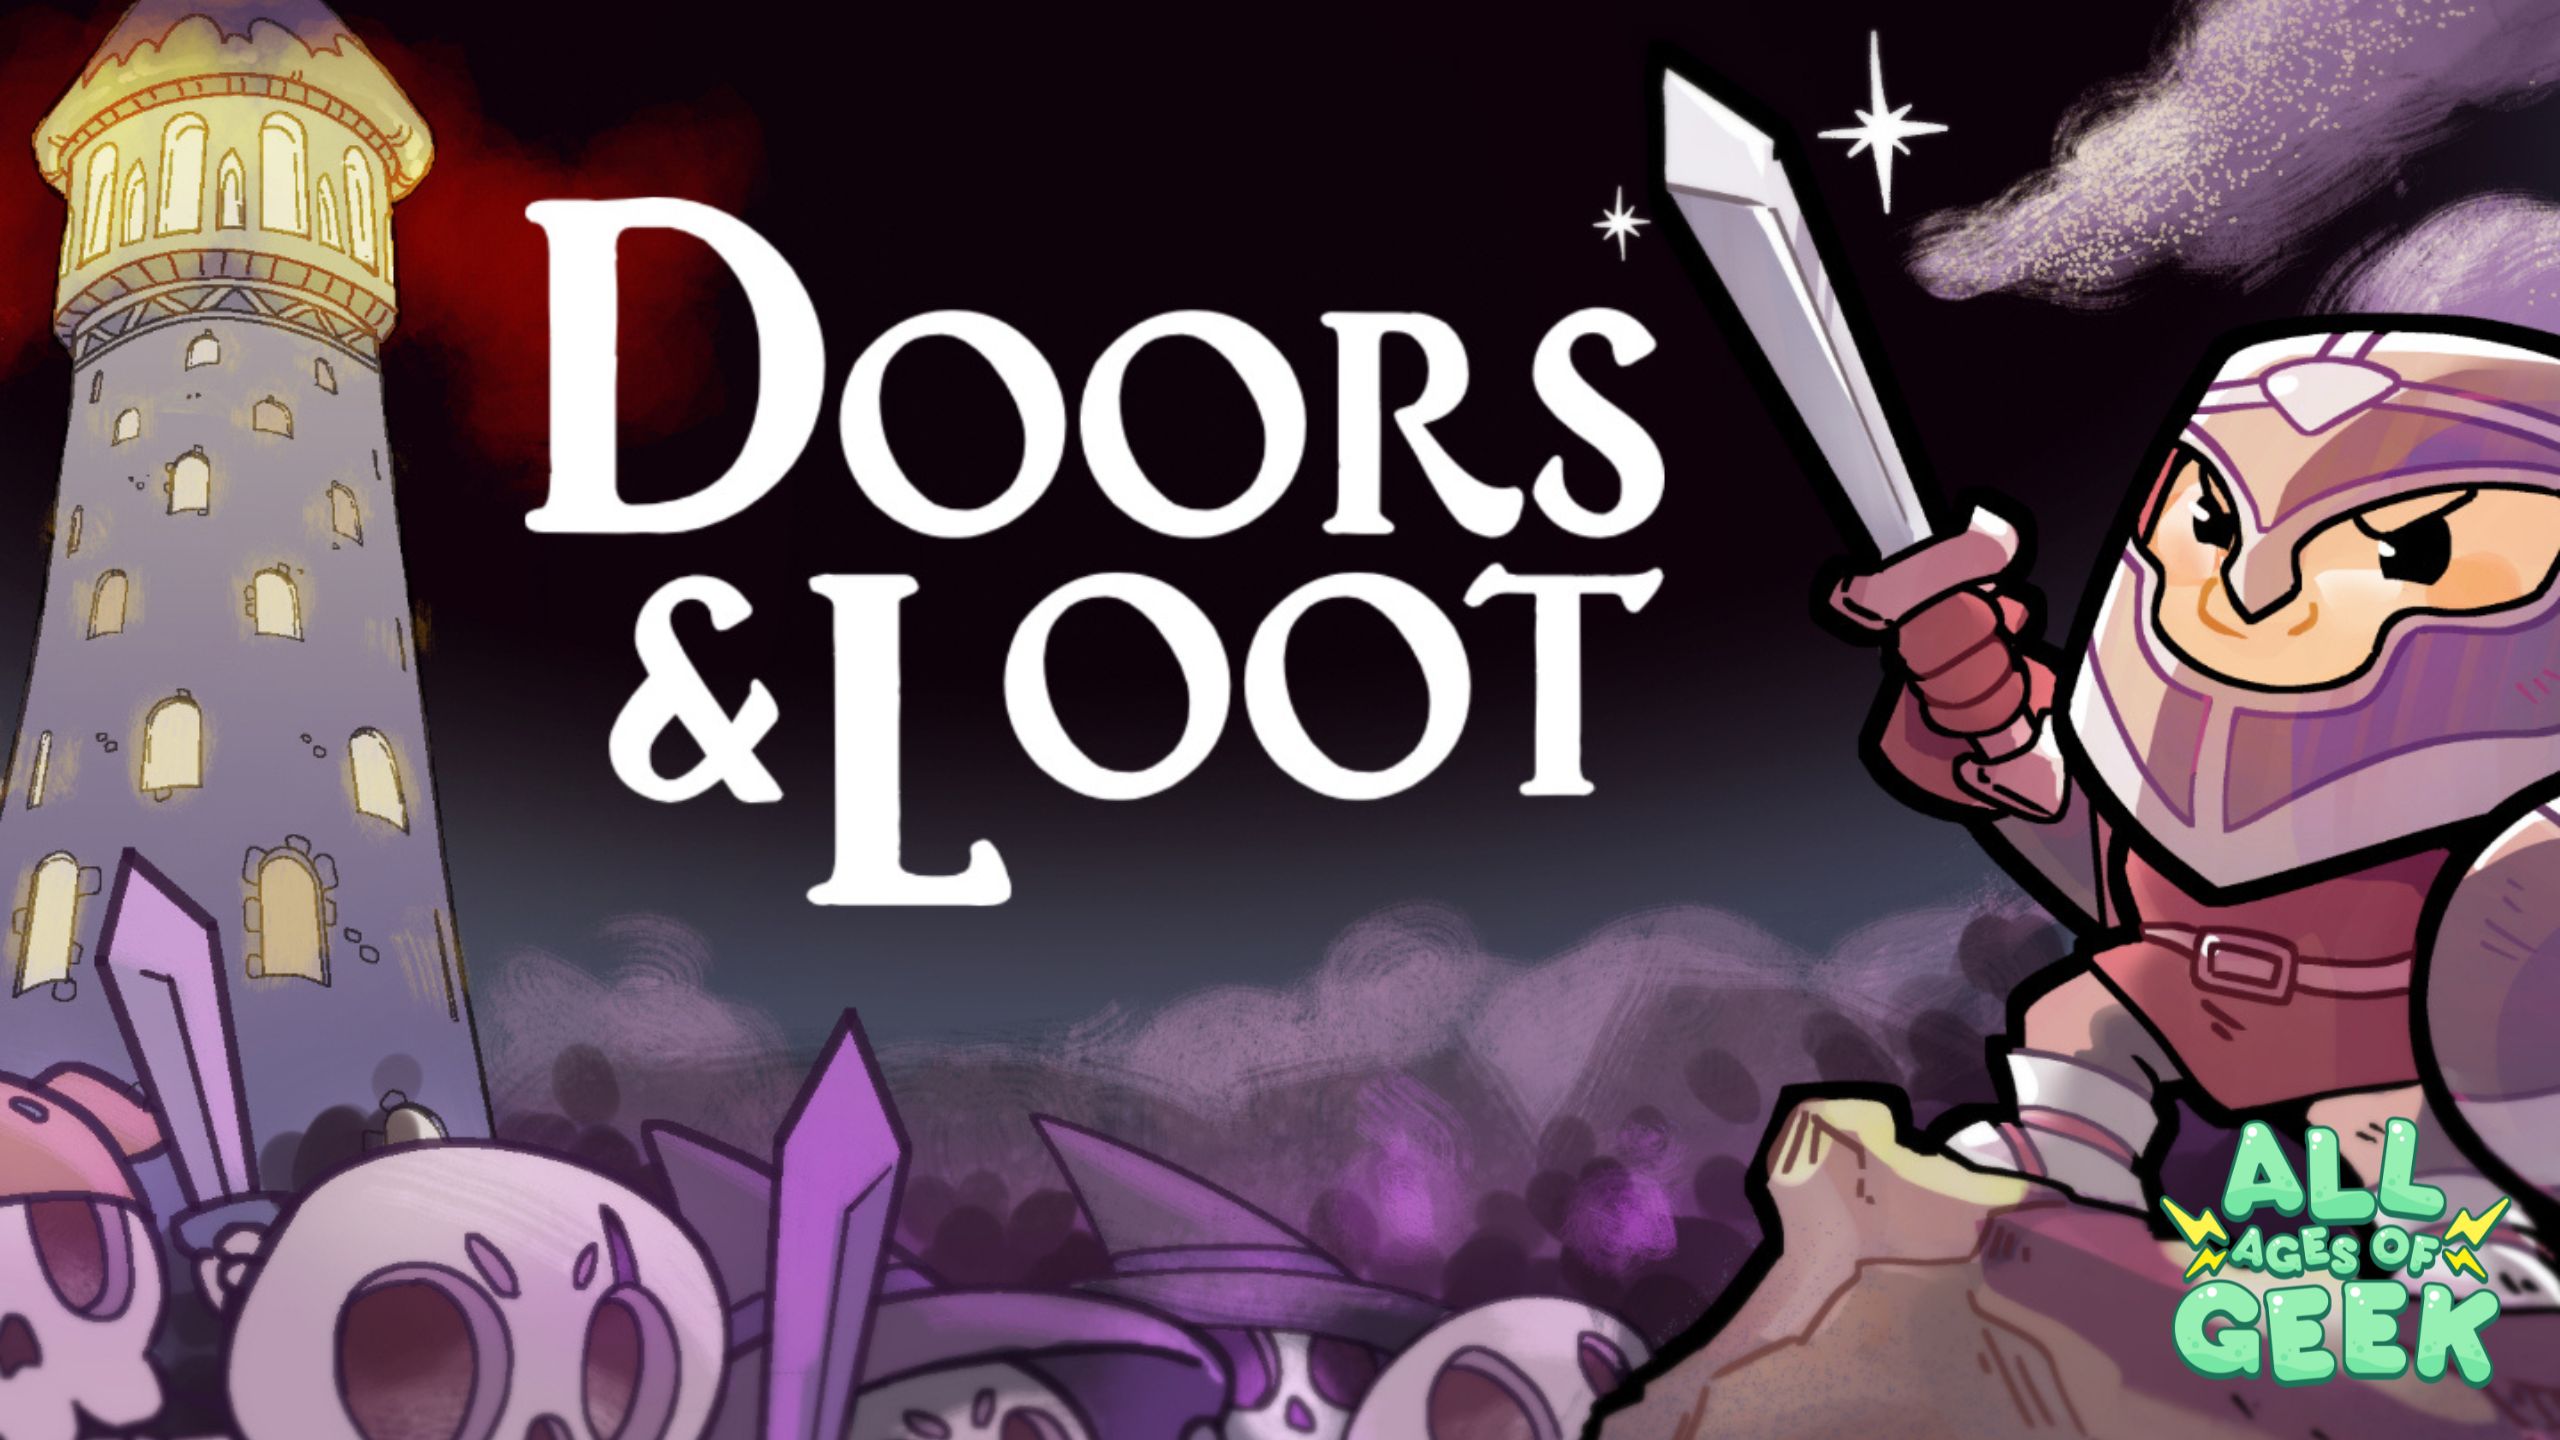 The image features the title "Doors & Loot" prominently in the center with bold, white letters. On the left side, there is a tall tower with illuminated windows, set against a dark, smoky background. At the bottom of the tower, there are various weapons and skulls, hinting at a battle or adventure. On the right side, a determined-looking character in armor, holding a sword, is ready for action. The "All Ages of Geek" logo is placed in the bottom right corner. The overall scene evokes a sense of adventure and quest in a fantasy setting.